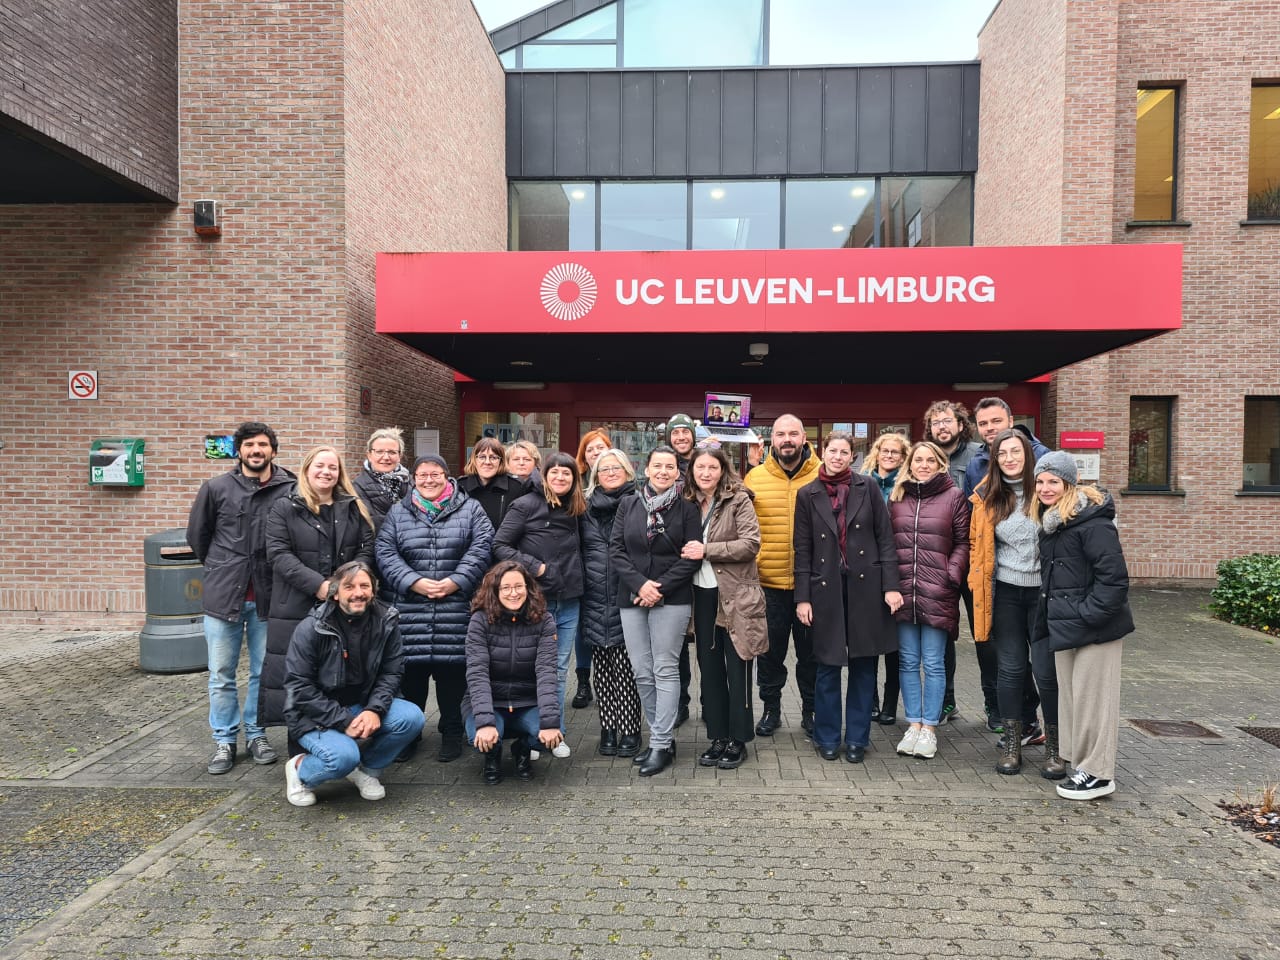 “FILLING THE GAP”: THE LEUVEN EXPERIENCE